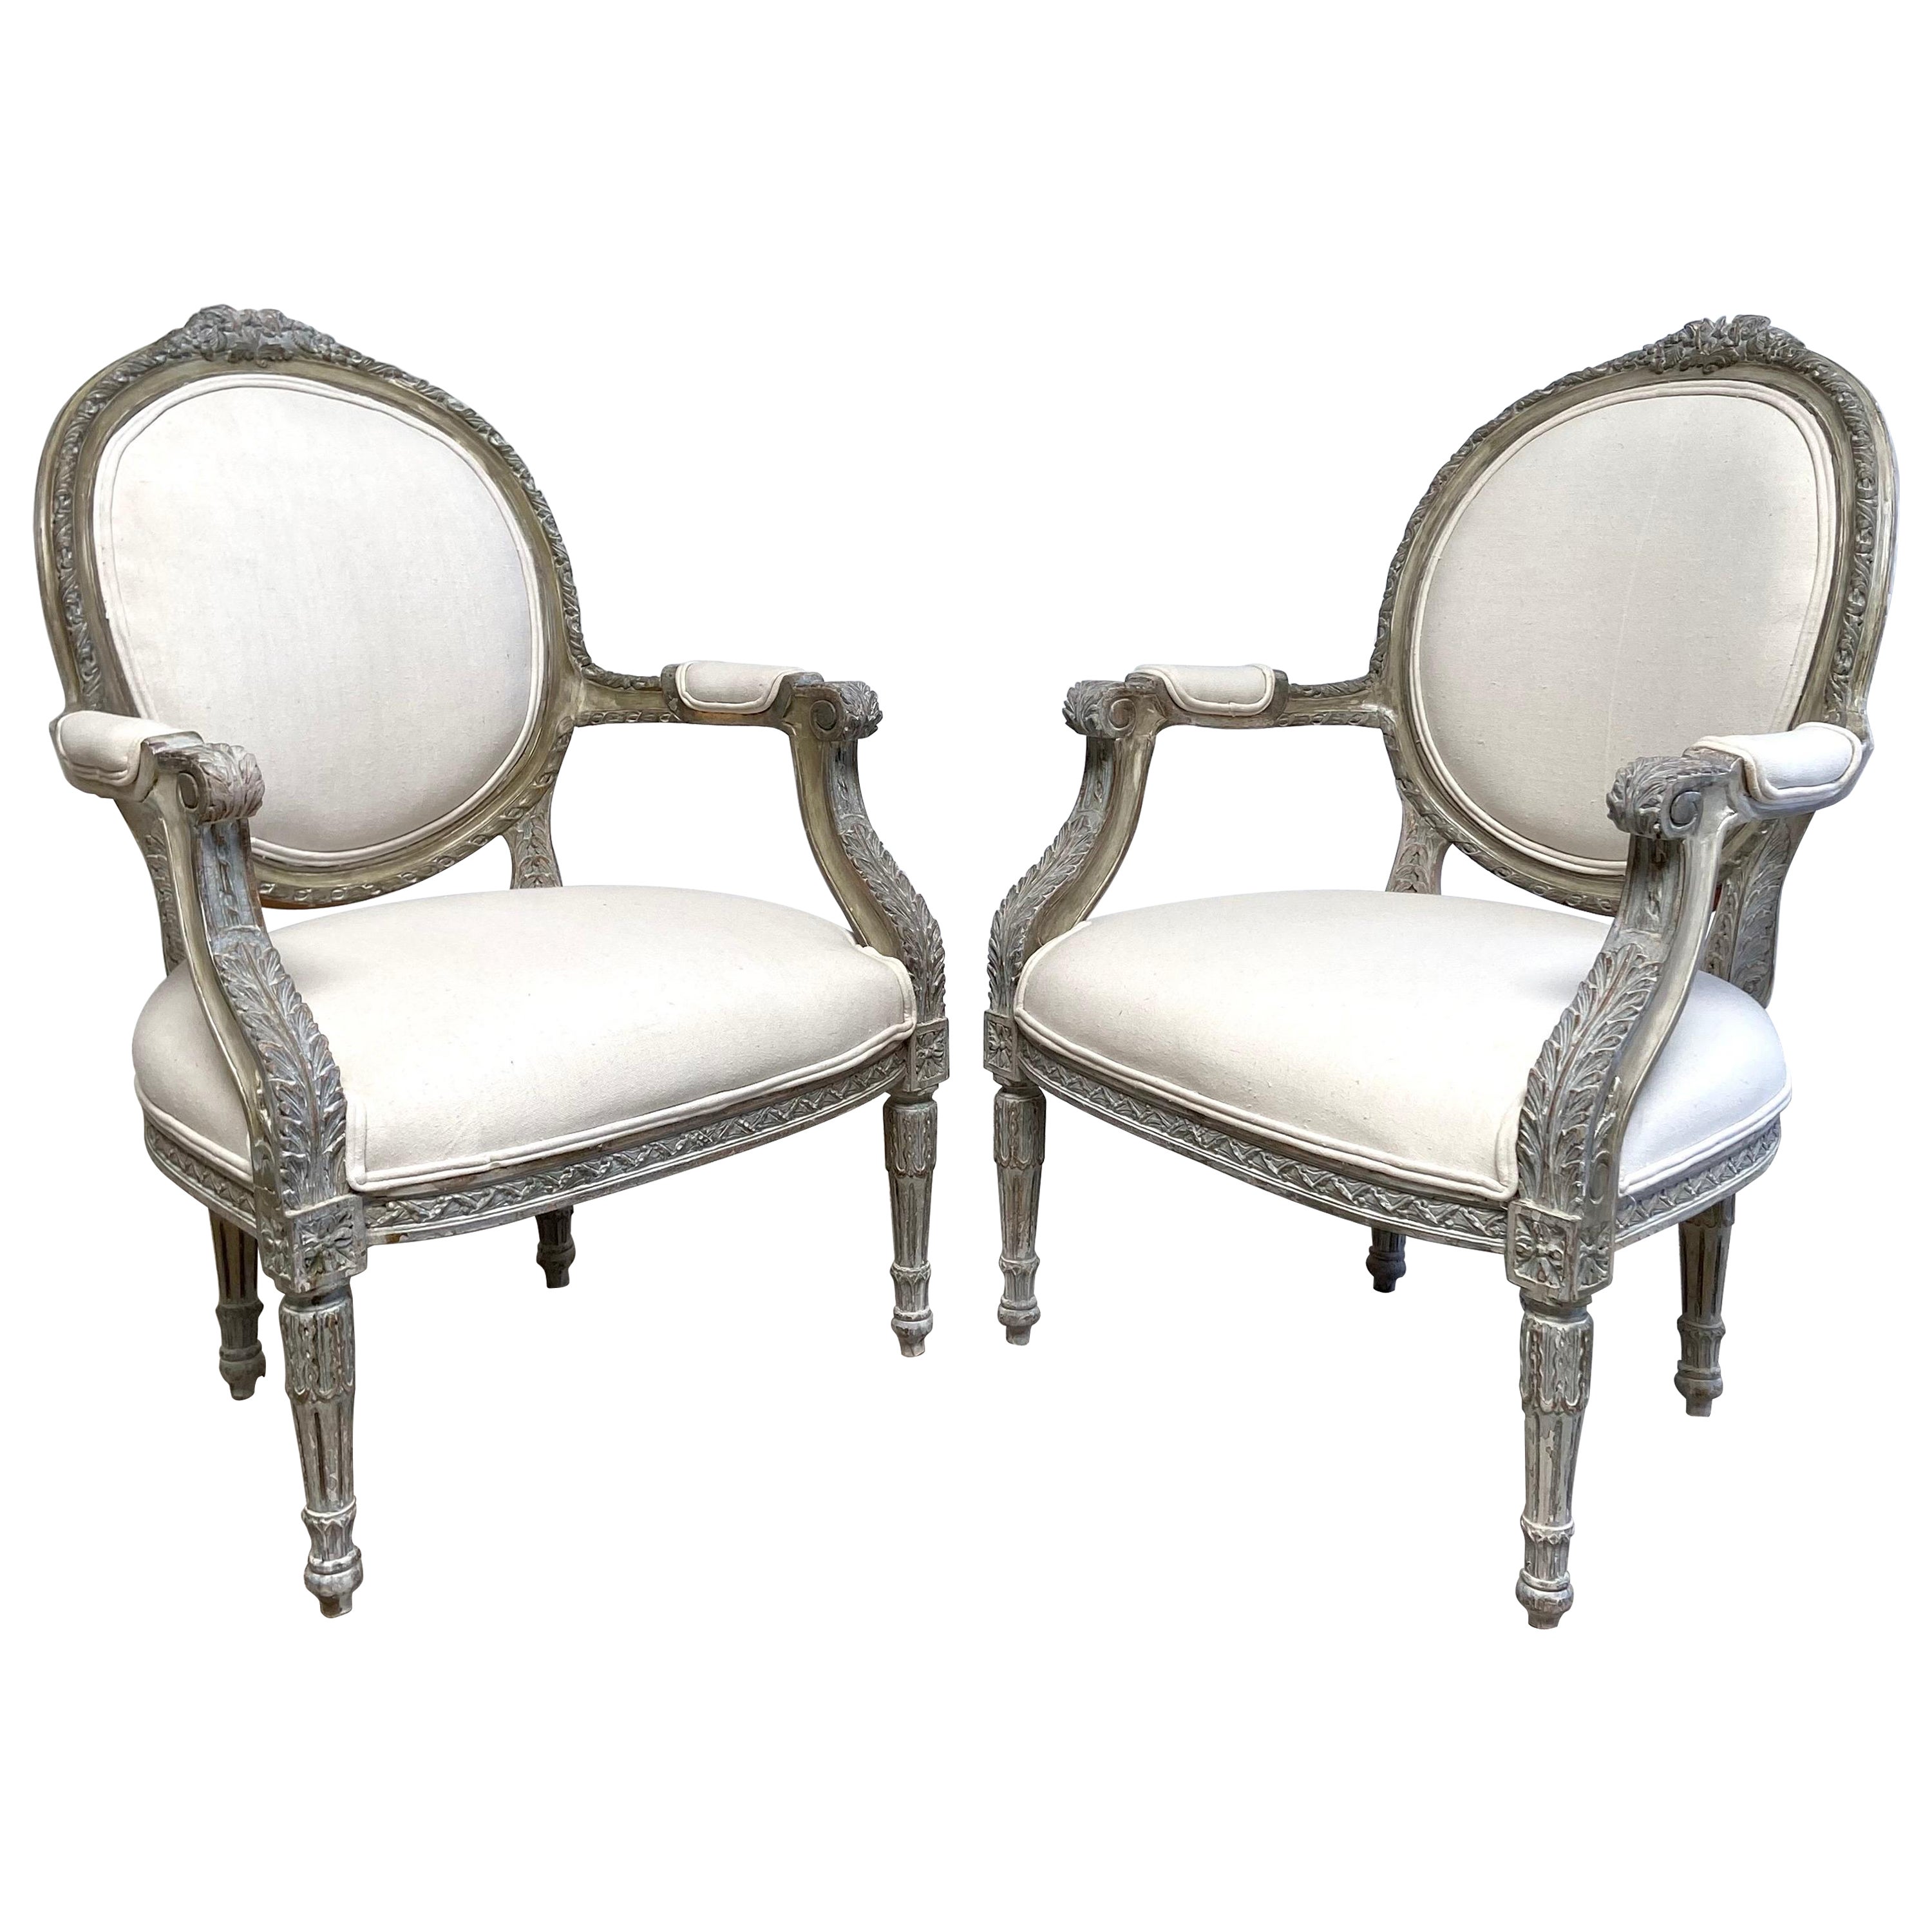 Pair of Vintage French Louis XVI Style Open Arm Chairs